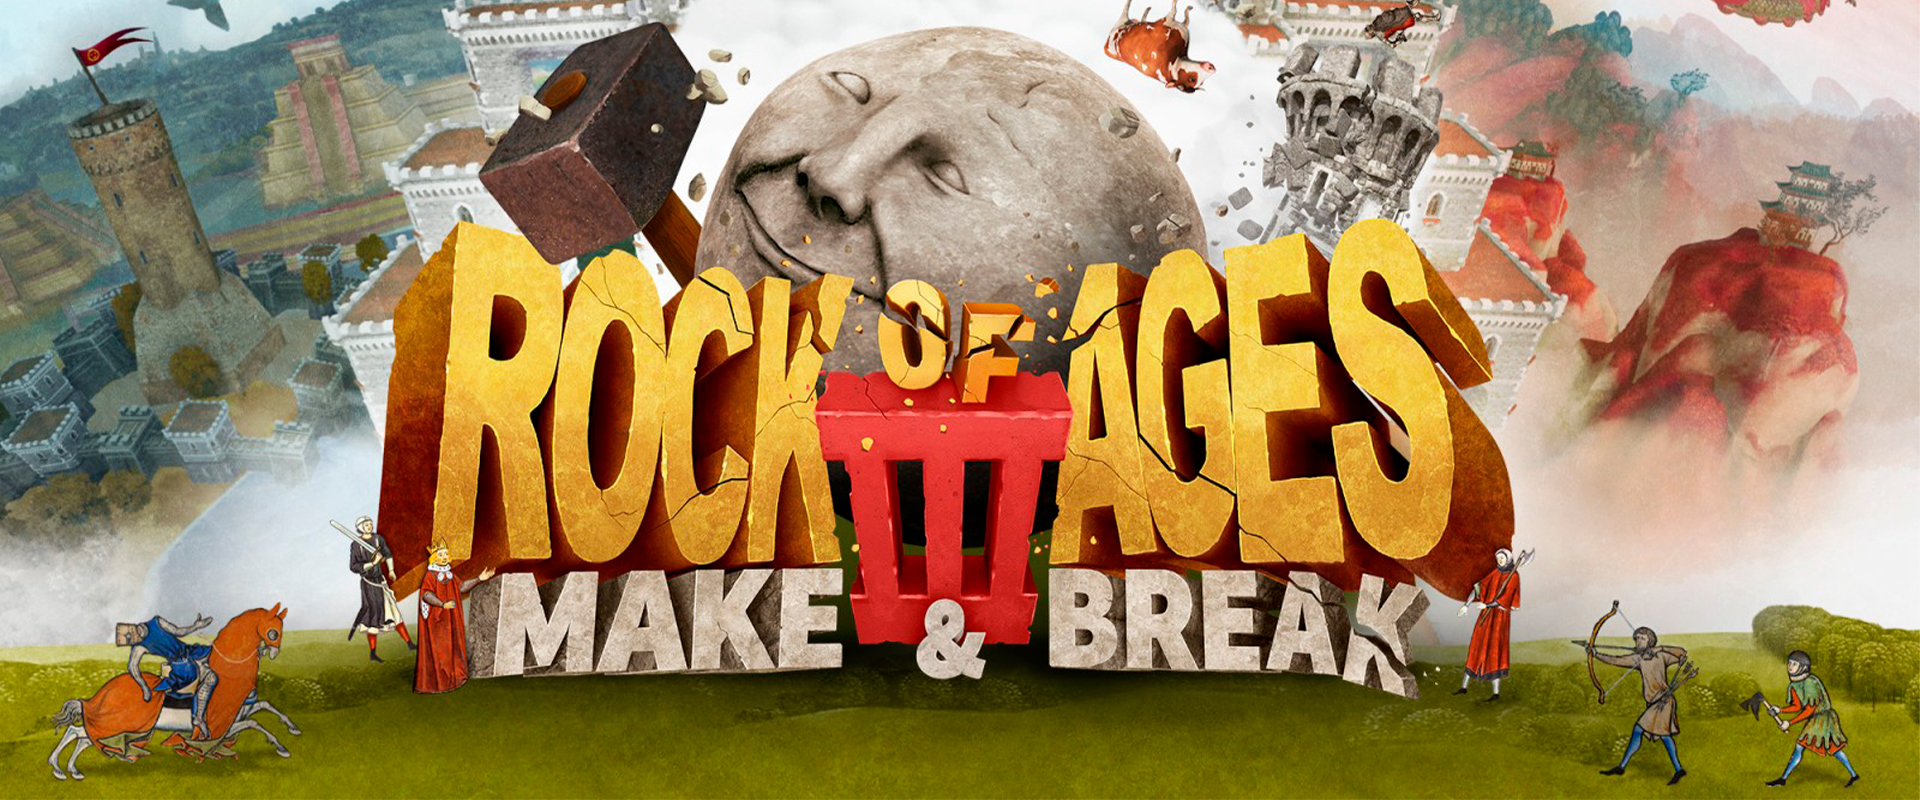 Rock of Ages 3